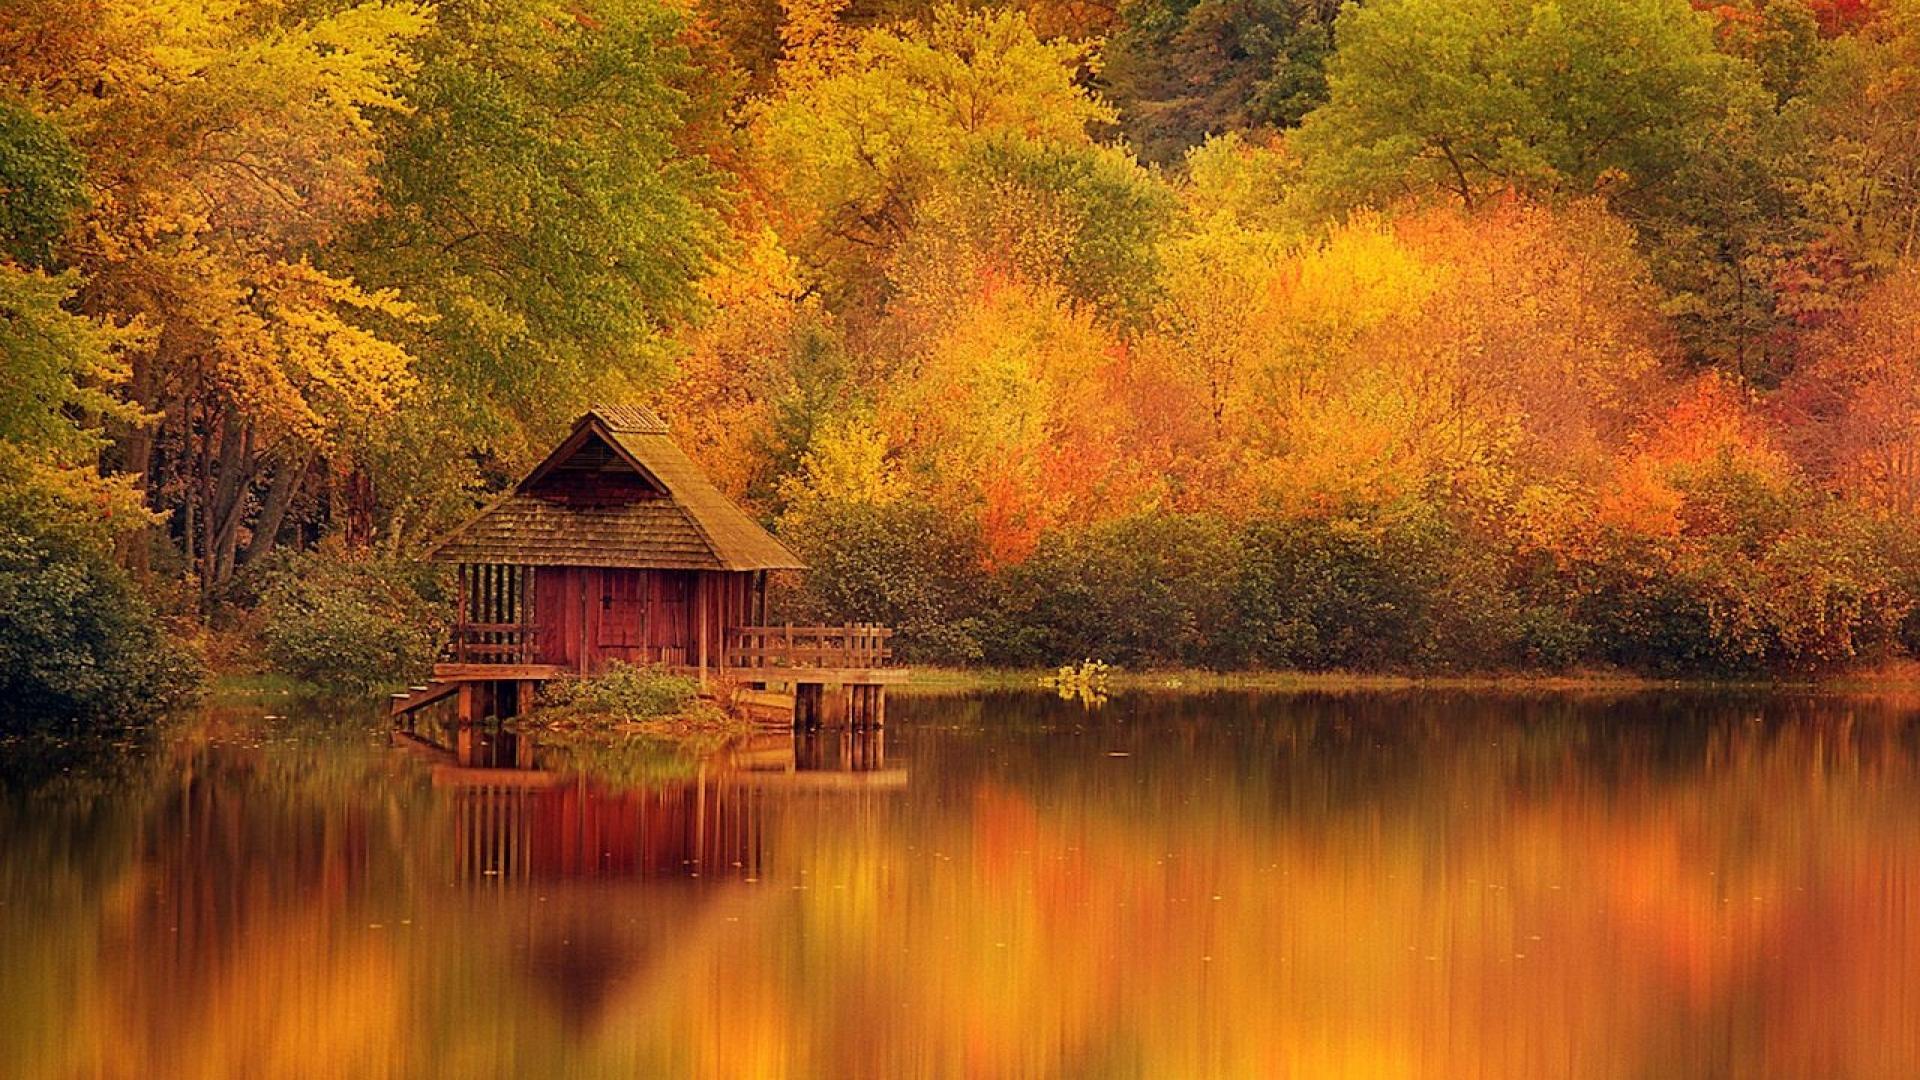 On The Lake In The Fall - Cabin On The Lake In The Fall - HD Wallpaper 